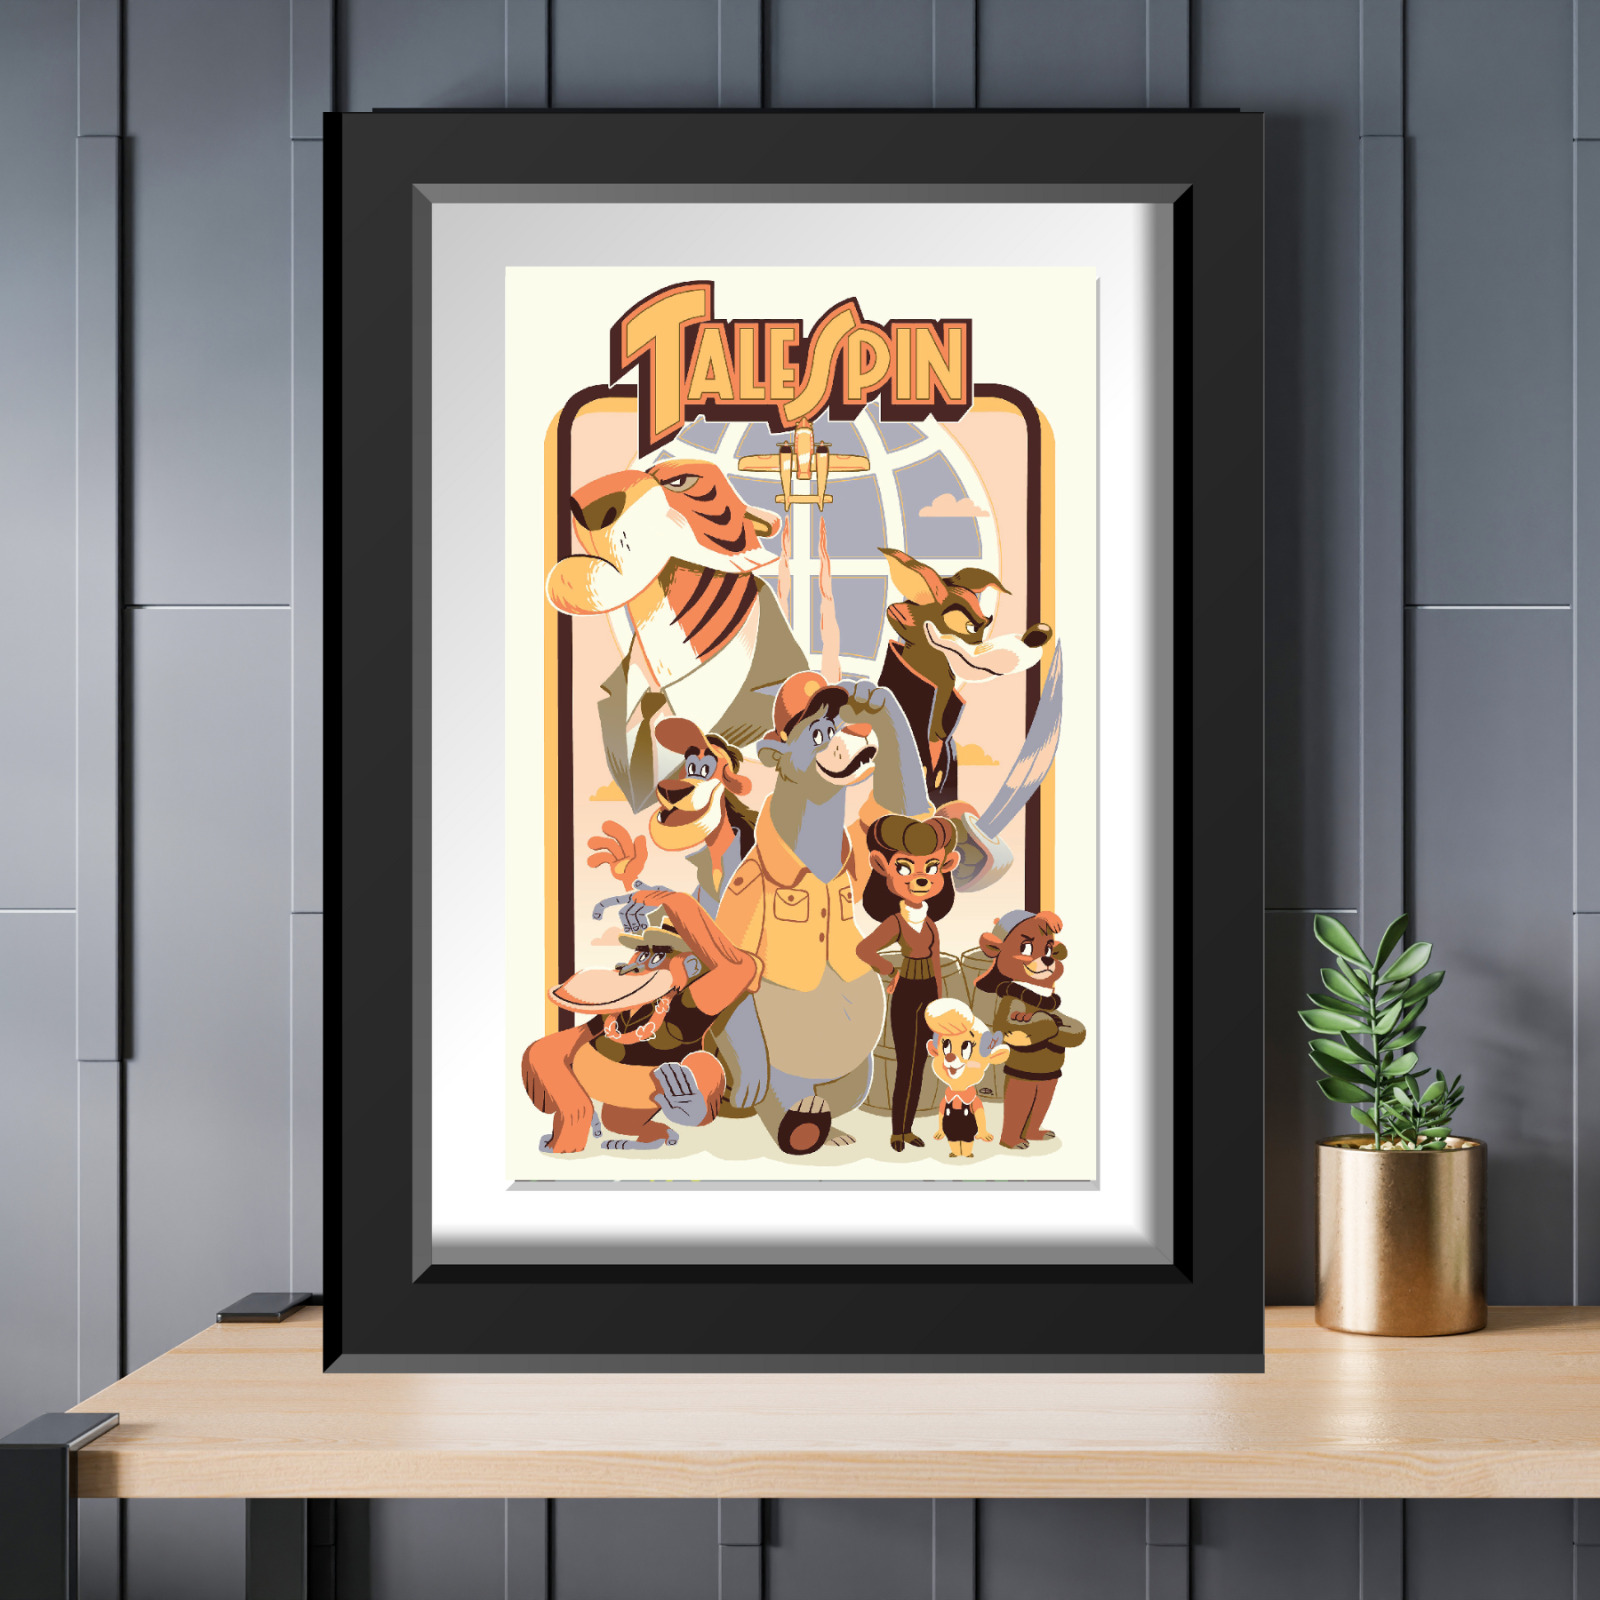 Disney Afternoon Talespin Baloo Wildcat Rebecca Kit King Louie Shere Khan Poster